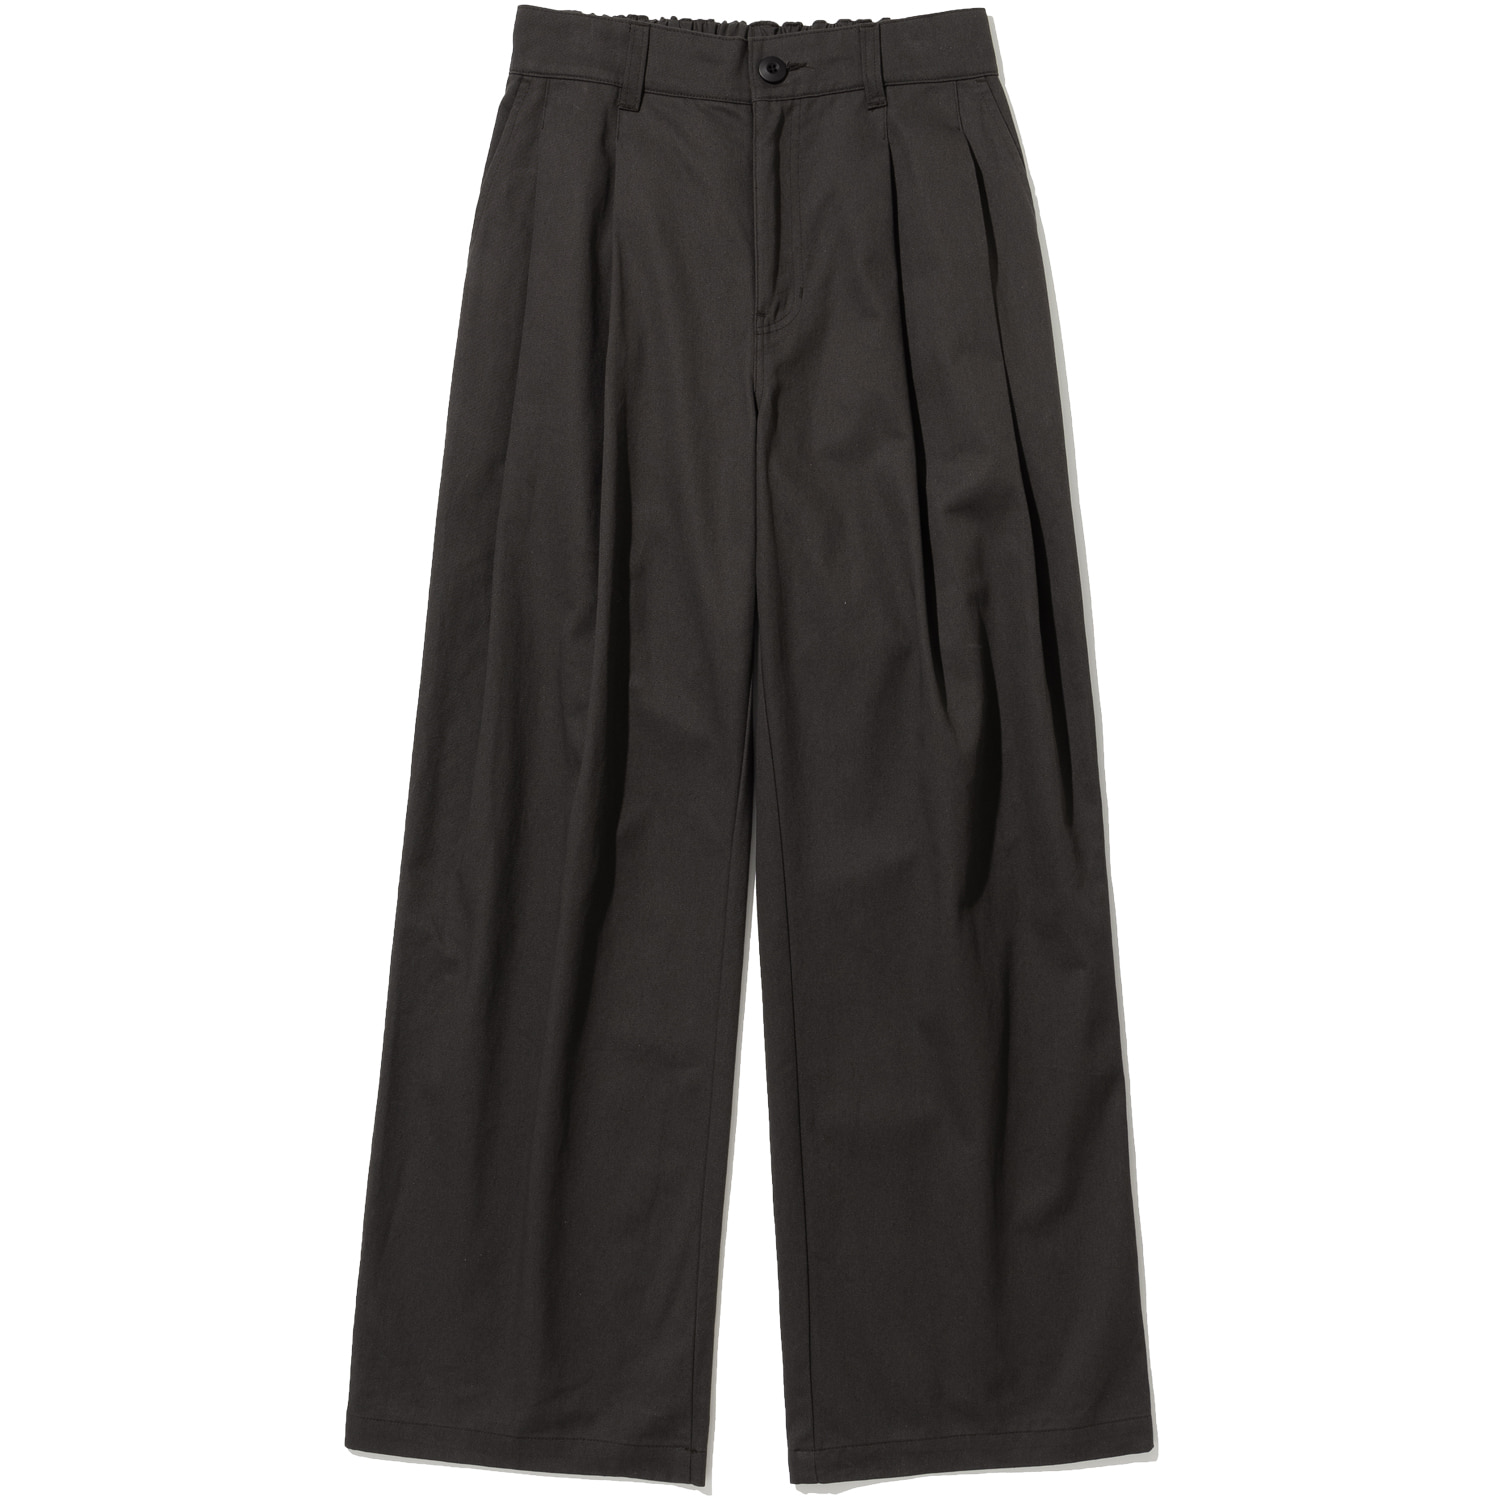 Two Tuck Wide Cotton Pants - Charcoal,NOT4NERD